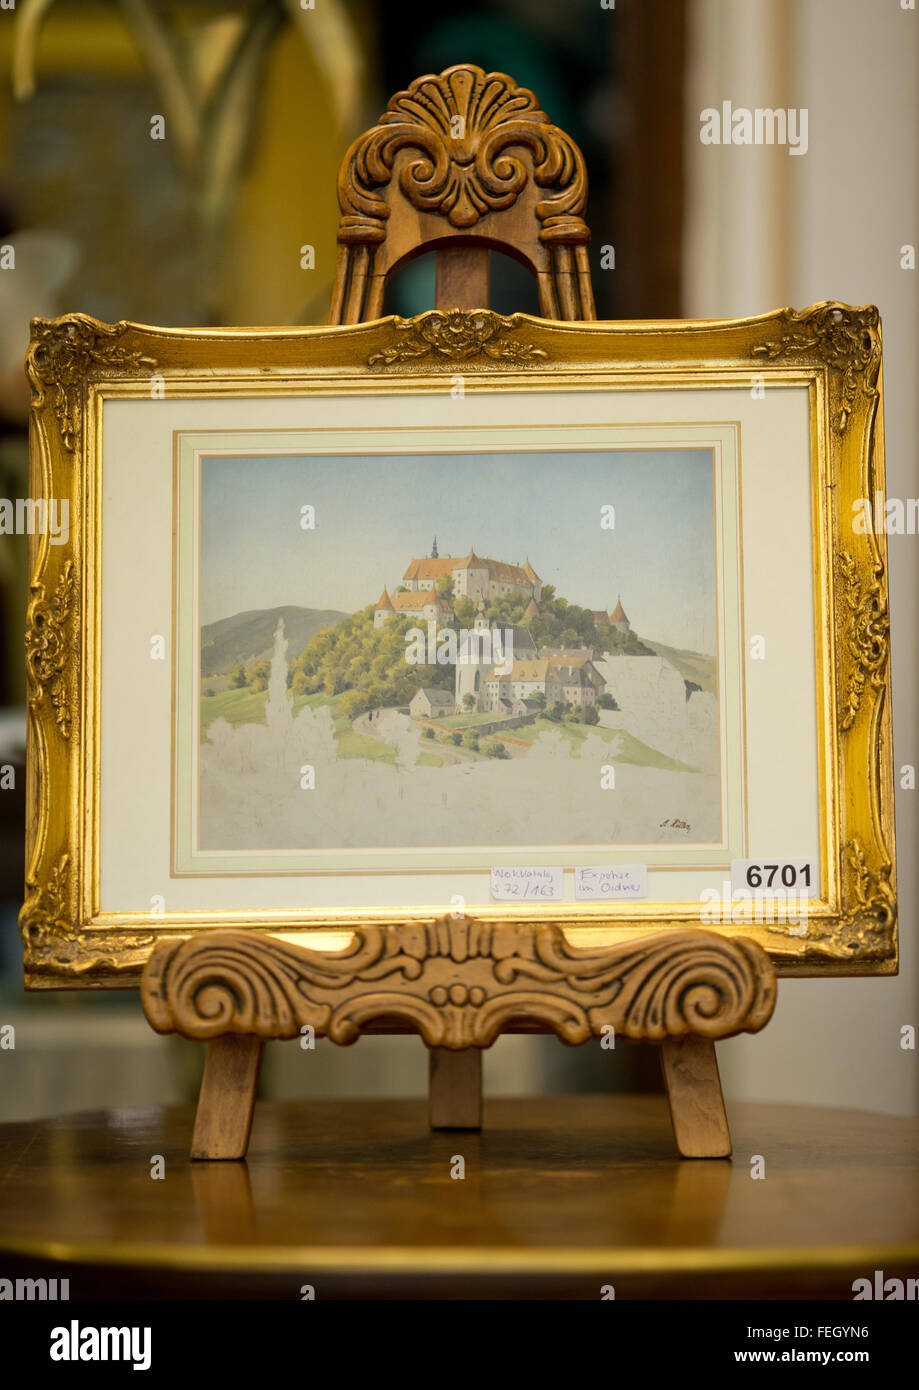 Nuremberg, Germany. 4th Feb, 2016. The water colour painting 'Burg Neulengbach Österreich', from 1912, which is attributed to Adolf Hitler as author, is presented at an auctioneer in Nuremberg, Germany, 4 February 2016. A total of 29 paintings and drawings, attributed to Adolf Hitler, have been auctioned off at Weidler actioneers in Nuremberg on 6 February 2016. Photo: Daniel Karmann/dpa/Alamy Live News Stock Photo